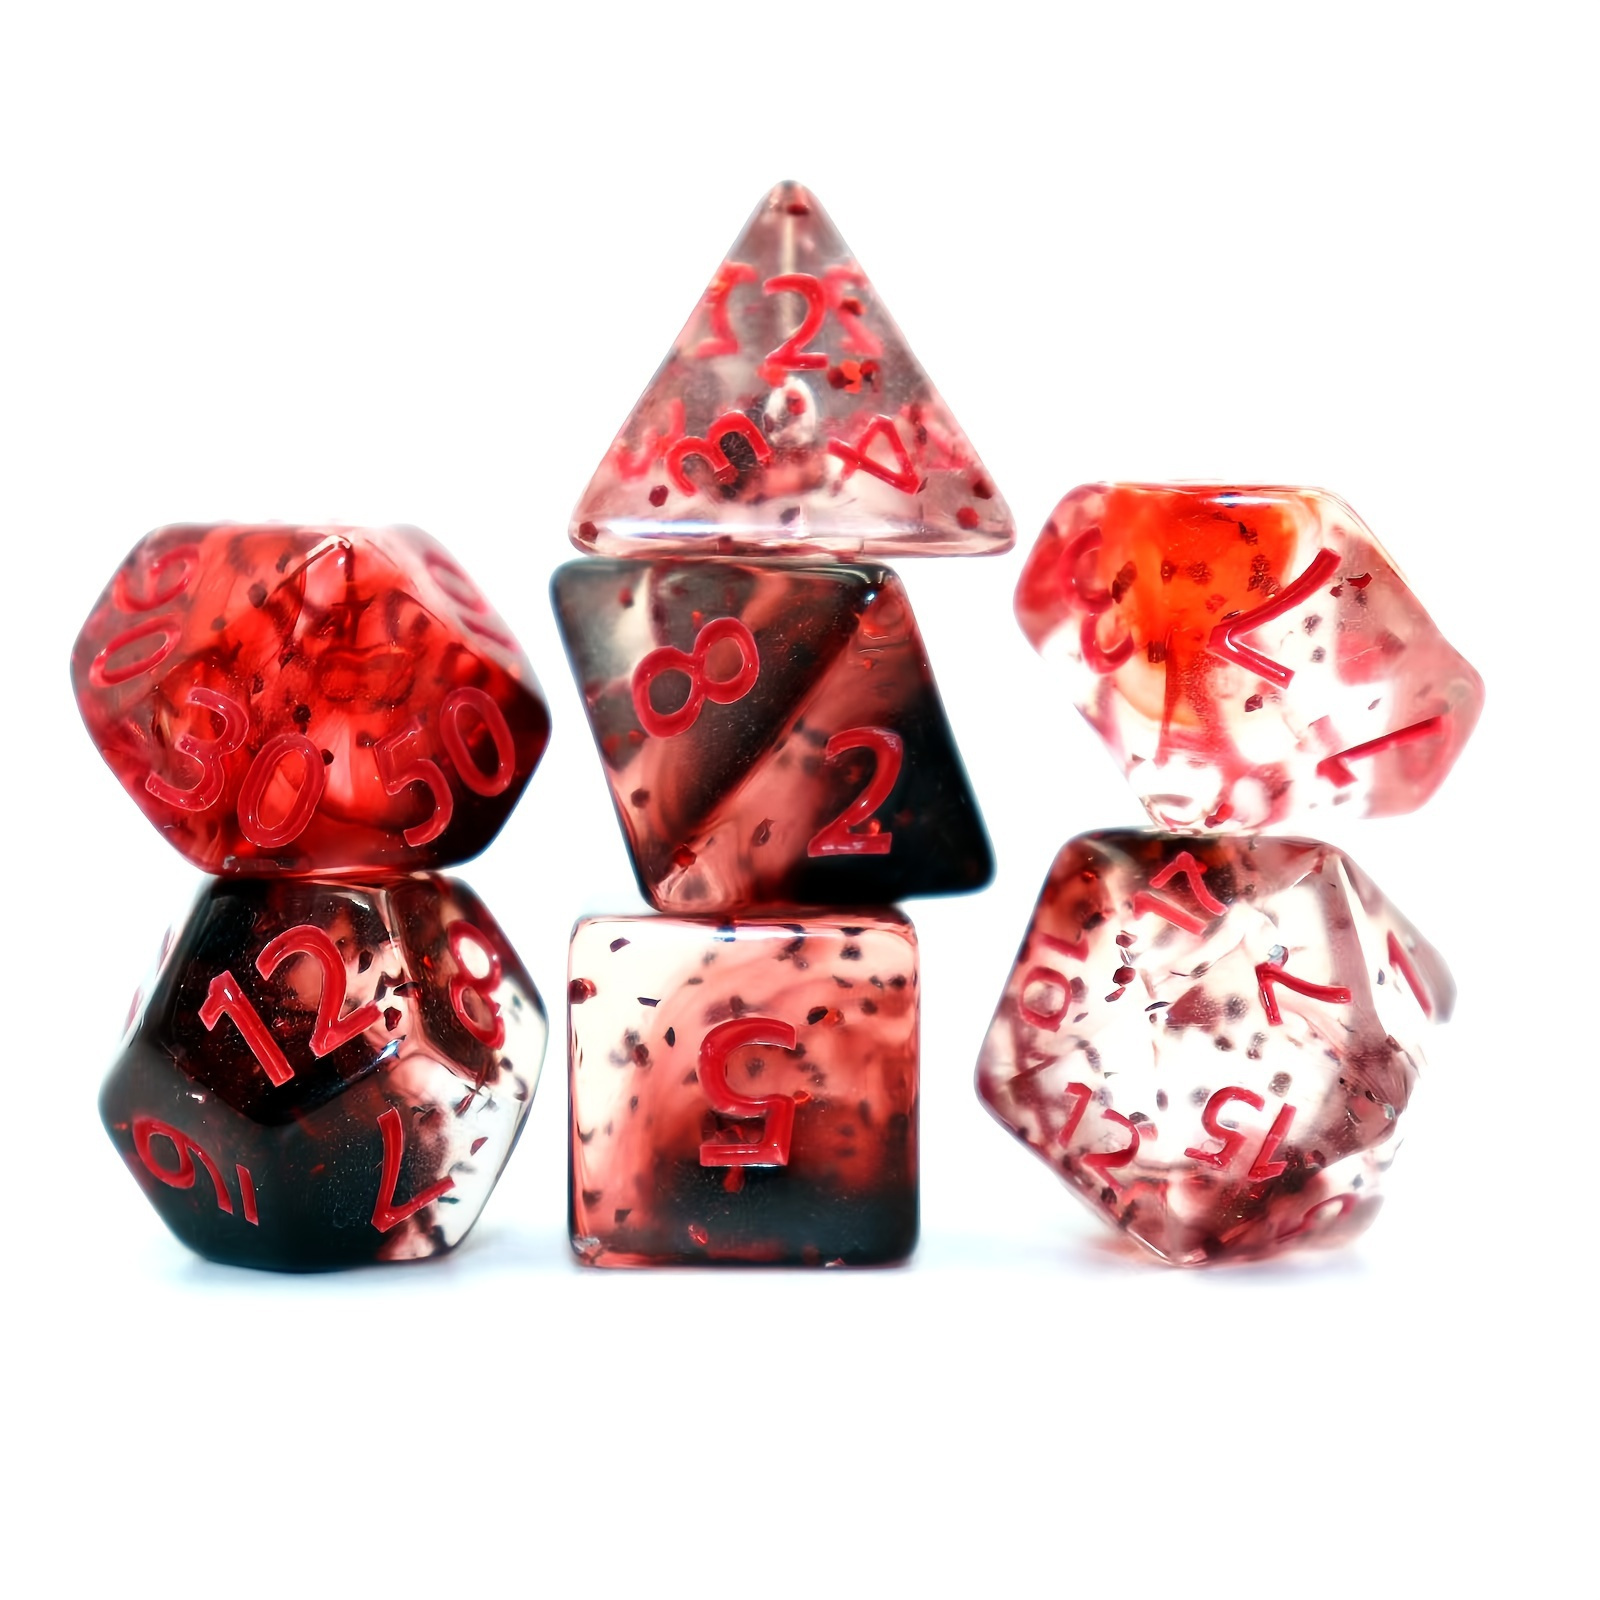 

7pcs Set Crystal Style Dnd Dice Set, Polyhedral Table Game Dice Role-playing Rpg Dice With Box, Gaming Gift